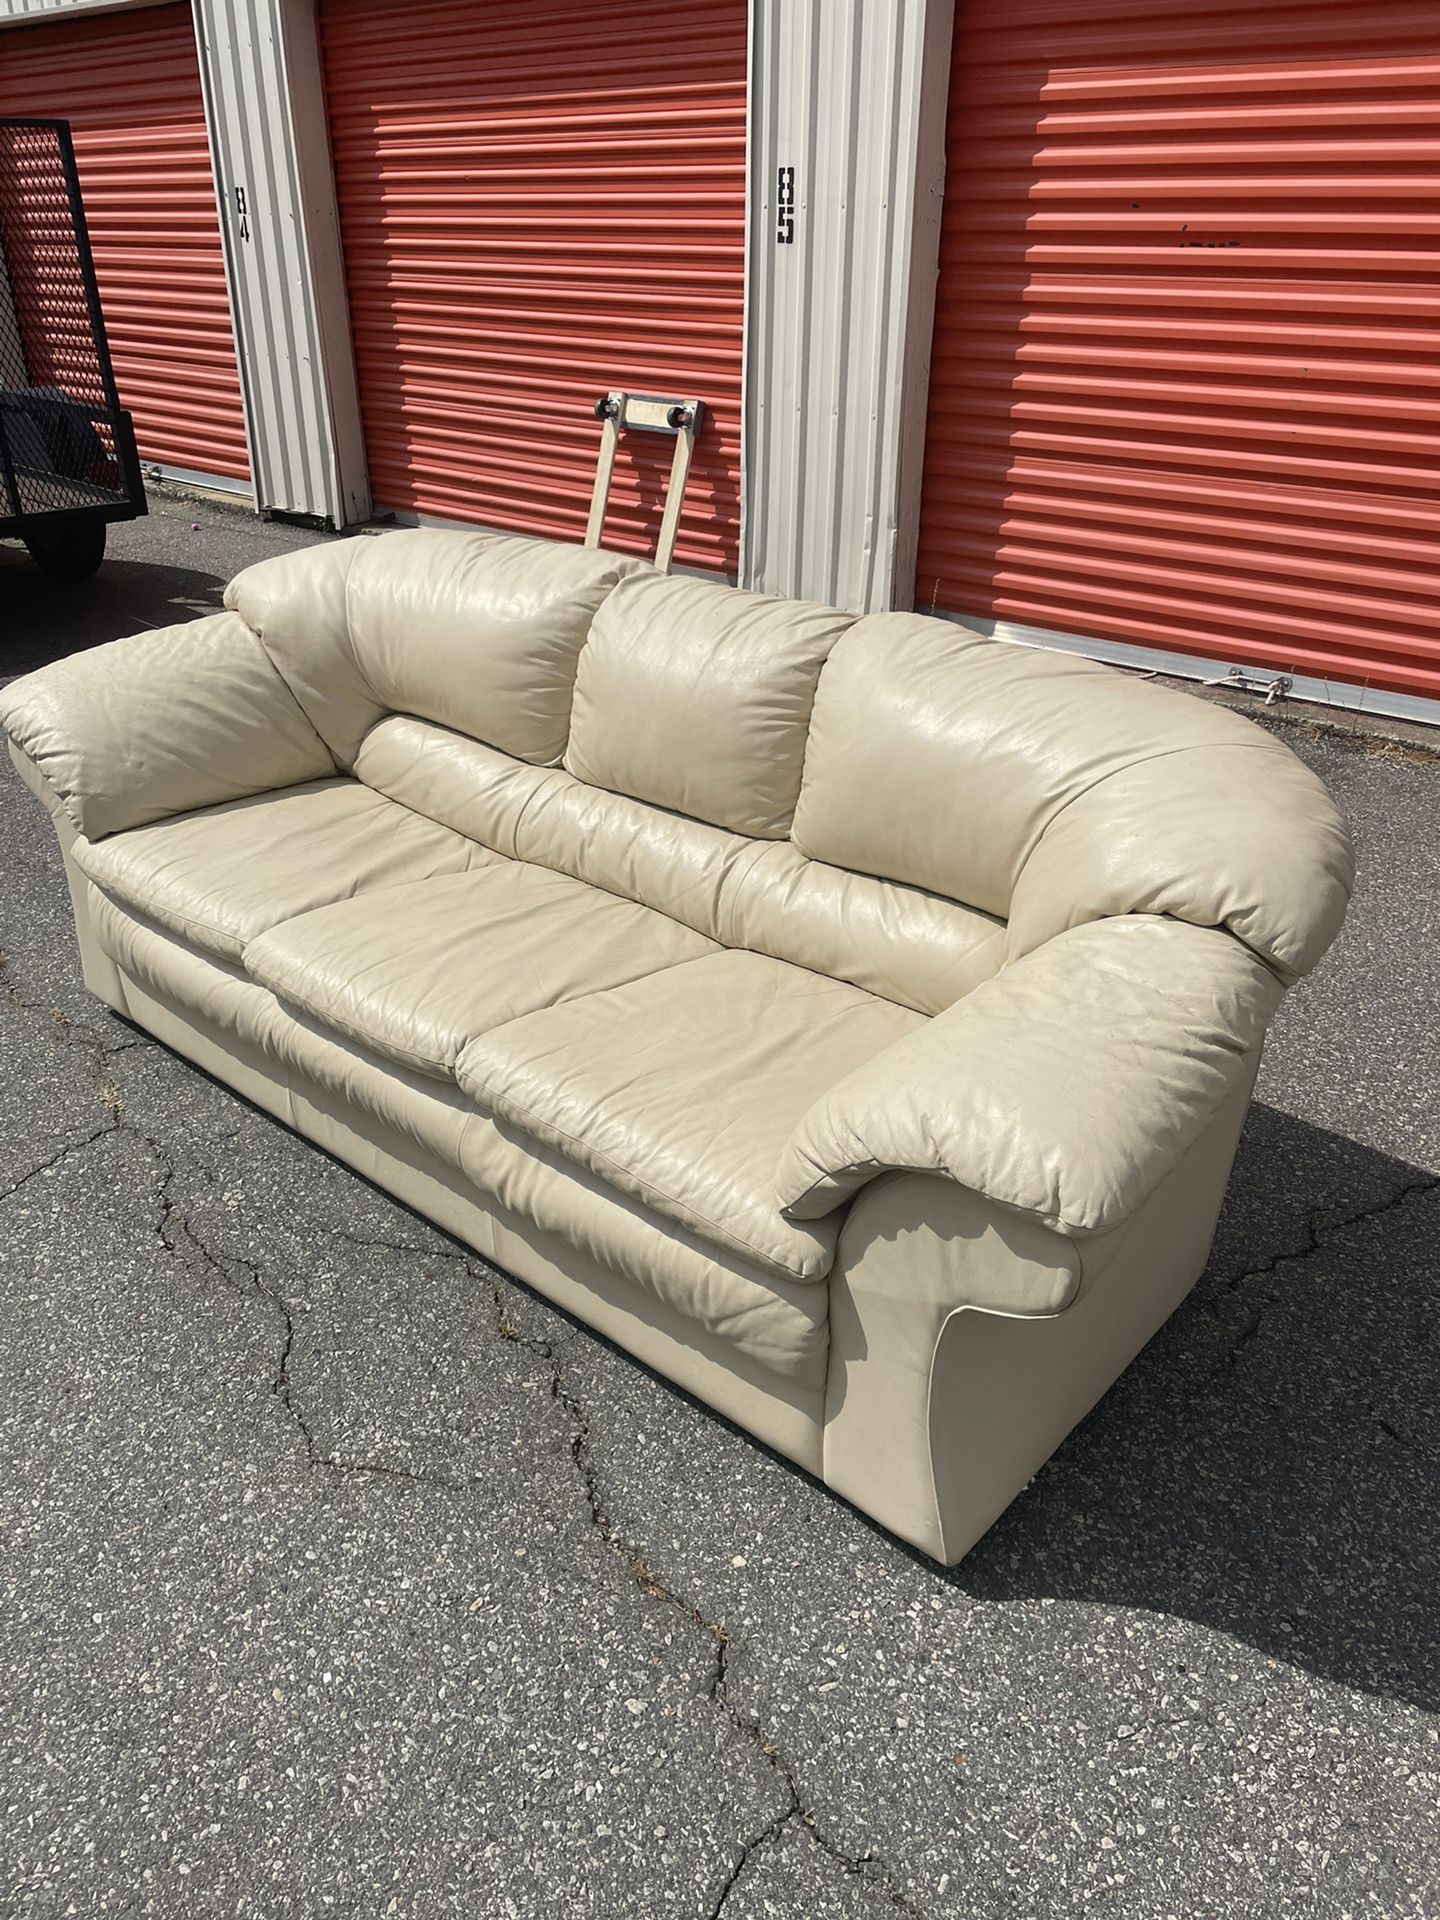 Free Delivery - Leather Cream Couch